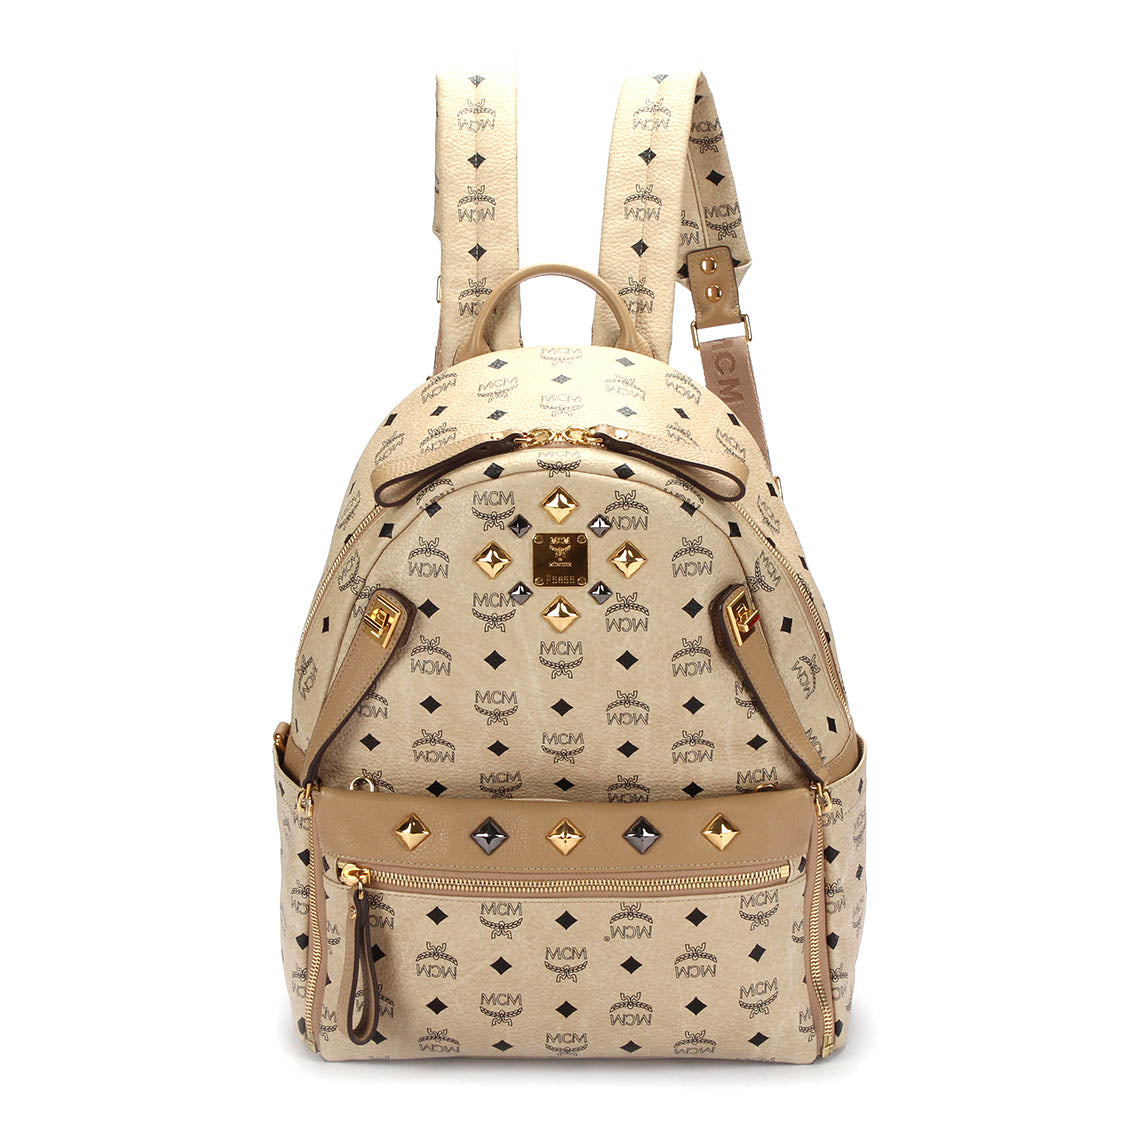 Visetos Studded Leather Double Stark Backpack 10011410